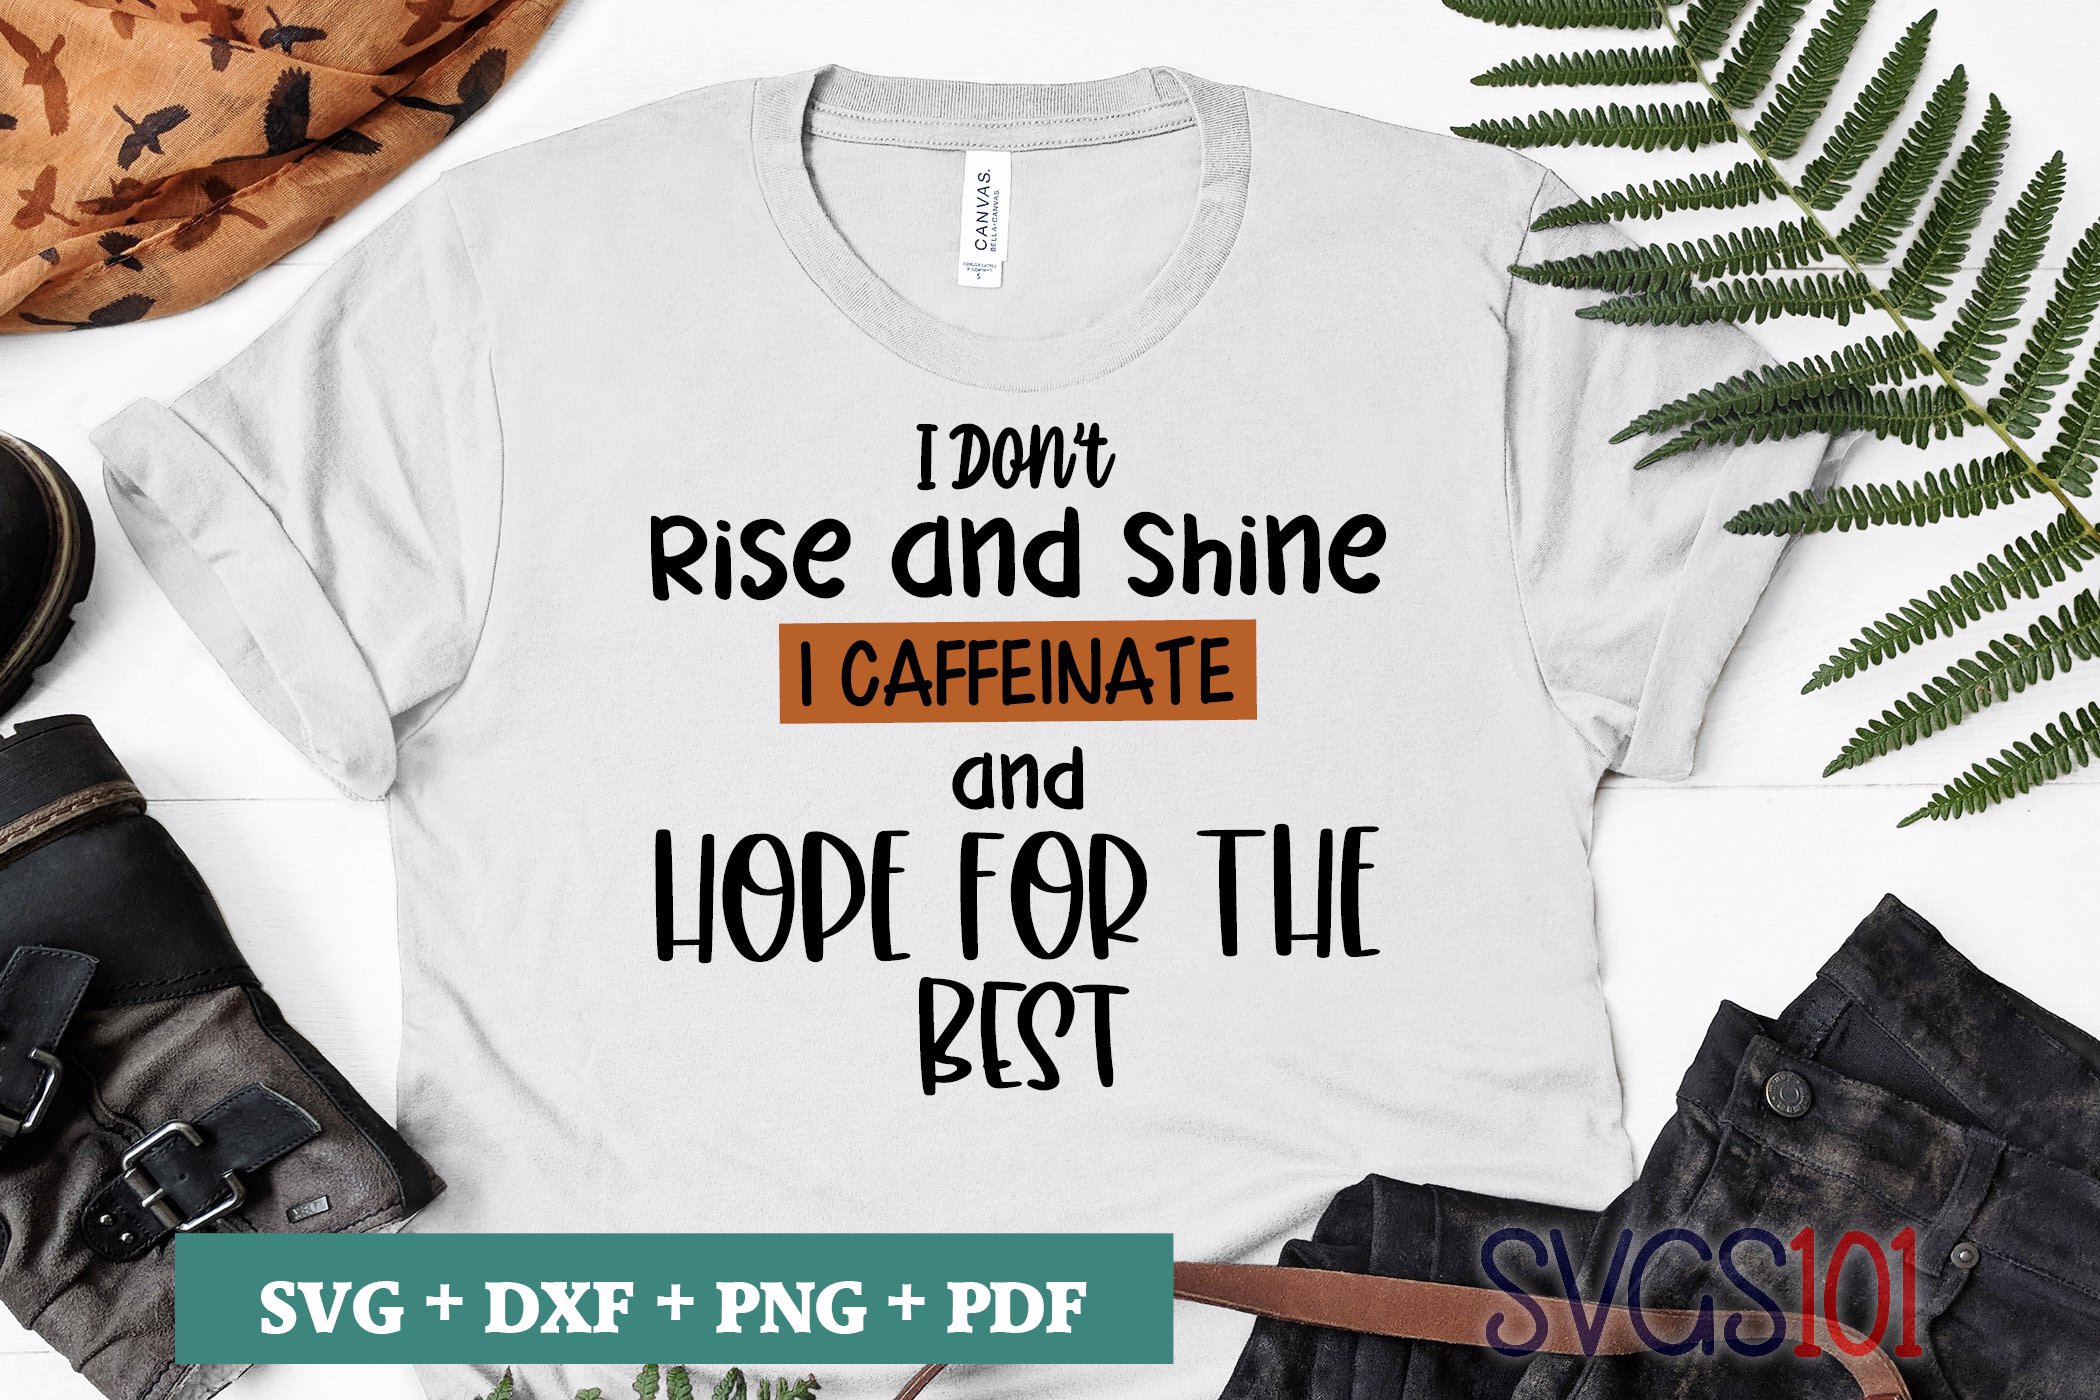 I Dont Rise And Shine I Caffeinate And Hope For The Best